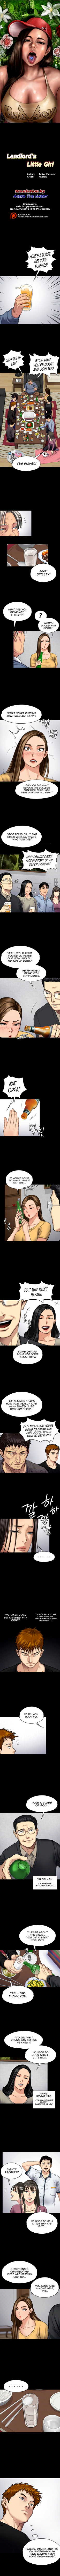 Panel Image 1 for chapter 100 of manhwa Queen Bee on read.oppai.stream